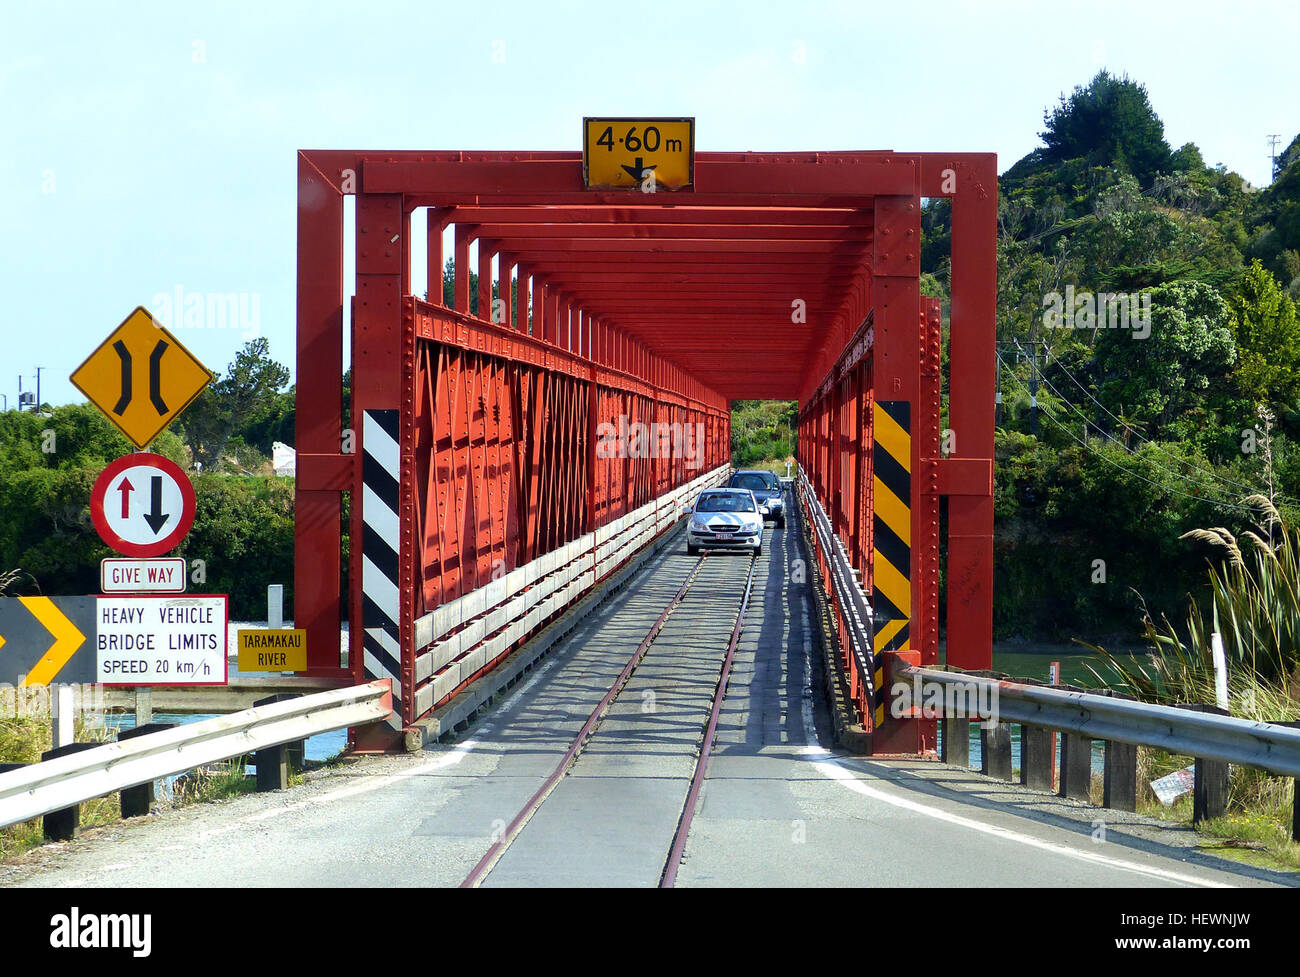 Road, Rail Bridges The Taramakau, Single Lane Road &amp; Rail Bridge West Coast, South Island. Some one lane bridges on New Zealand roads allow for the passage of both motorists and trains.  Trains always have the right of way.  Do not try and beat the train across a bridge or at a rail crossing, it is foolish and down right dangerous. Stock Photo